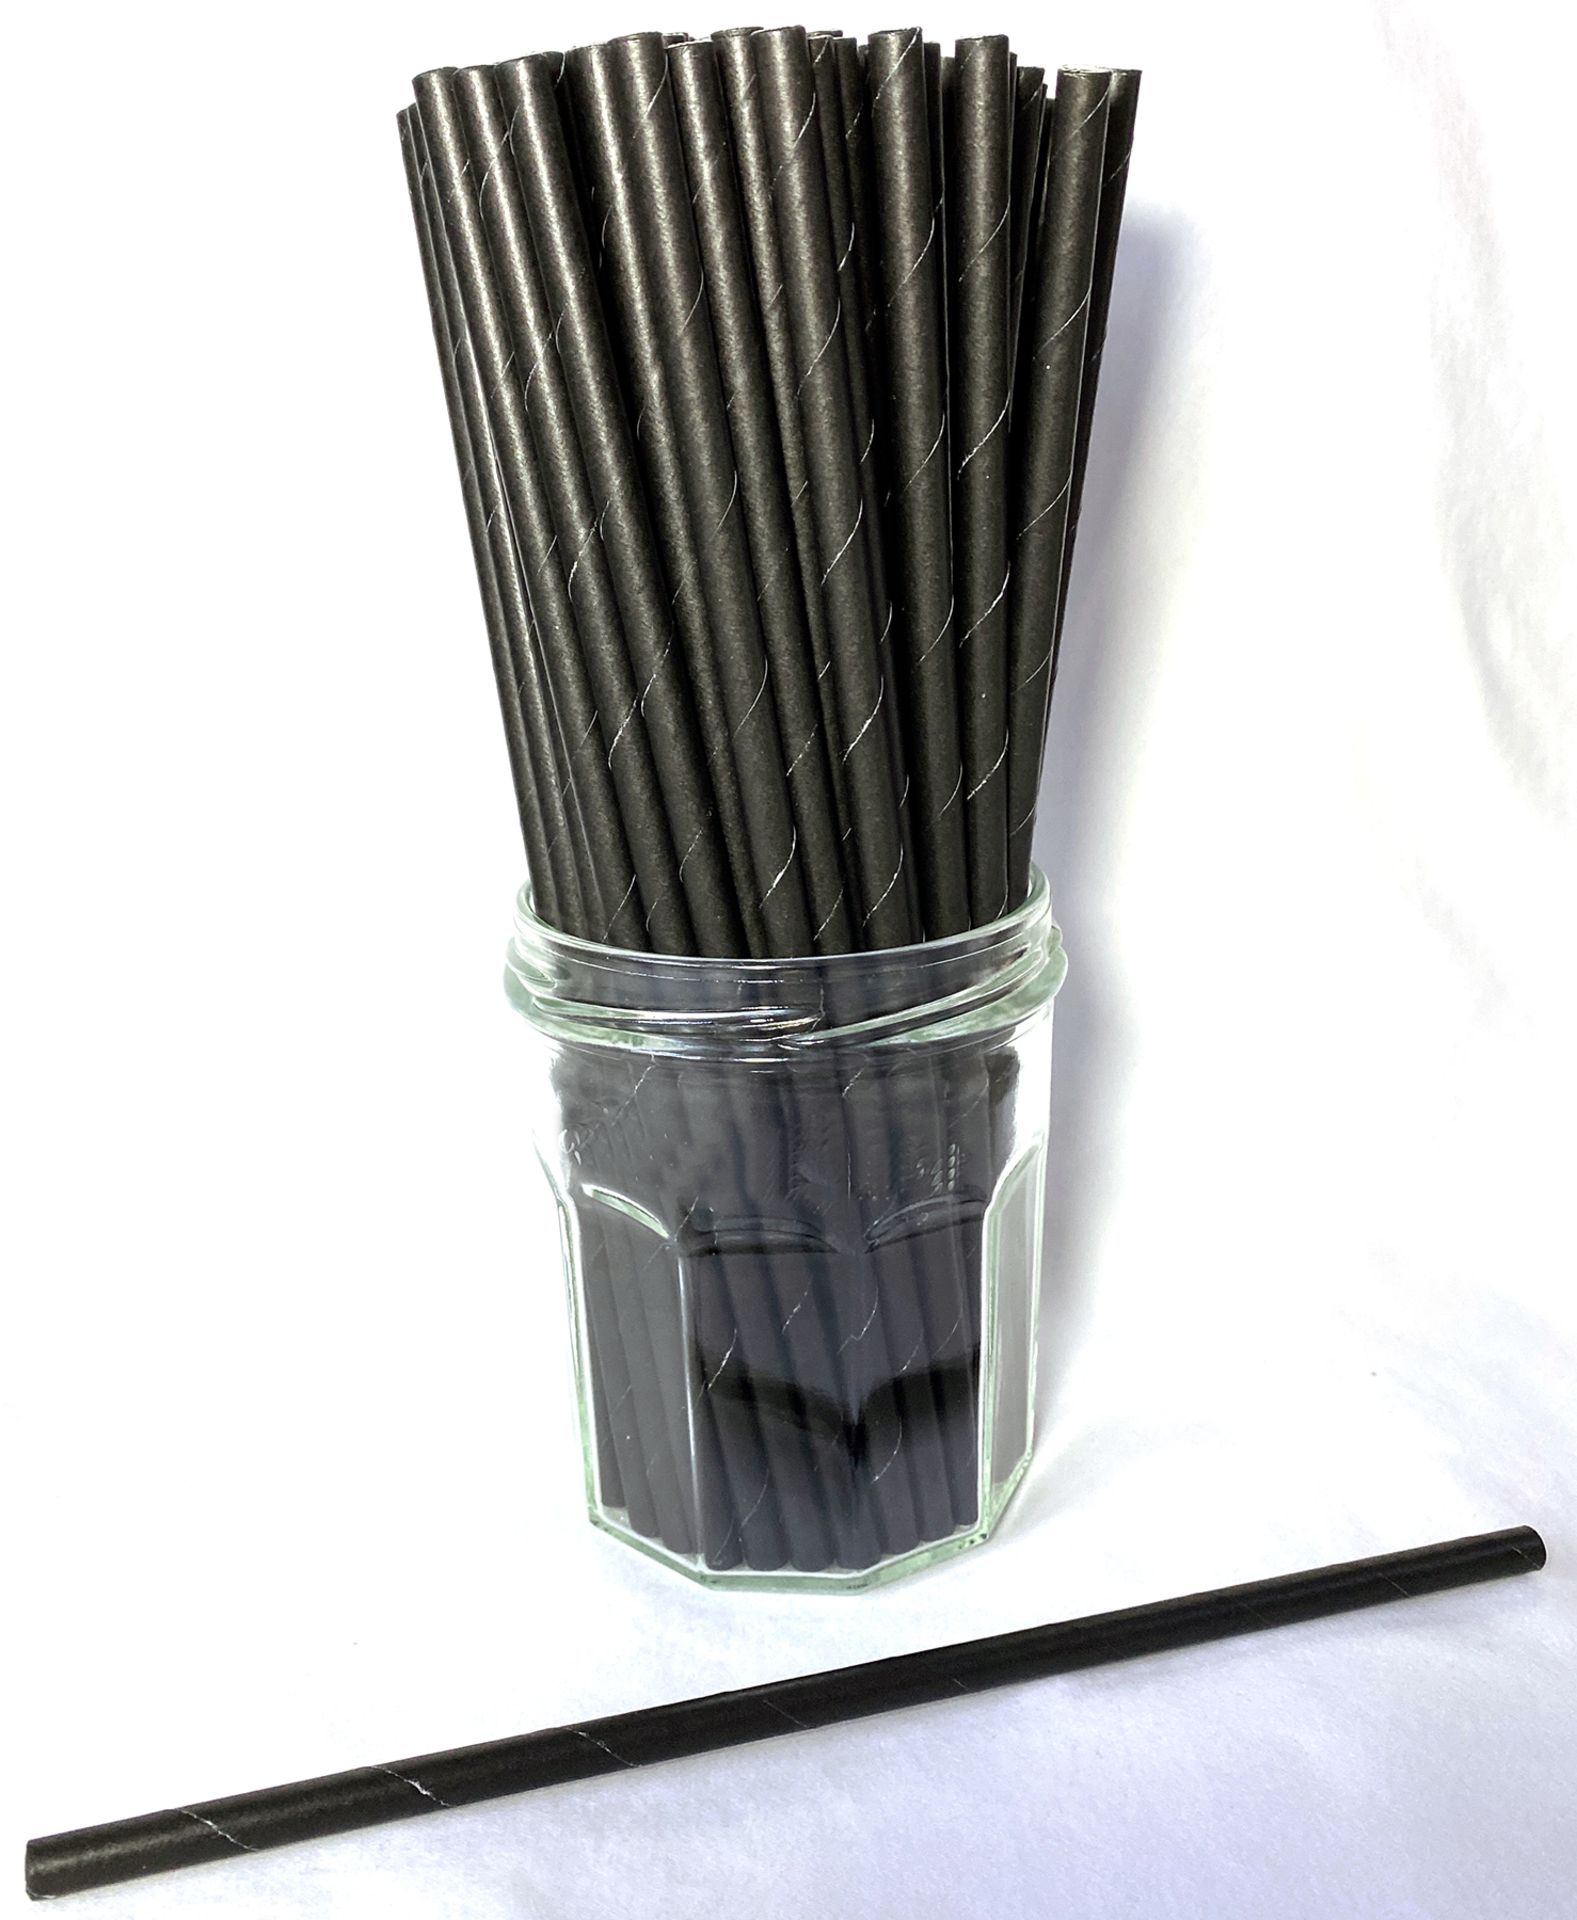 2 x Boxes of Biodegradable Jumbo Straws by 888 Gastro Disposables | DSP51 - Image 2 of 4